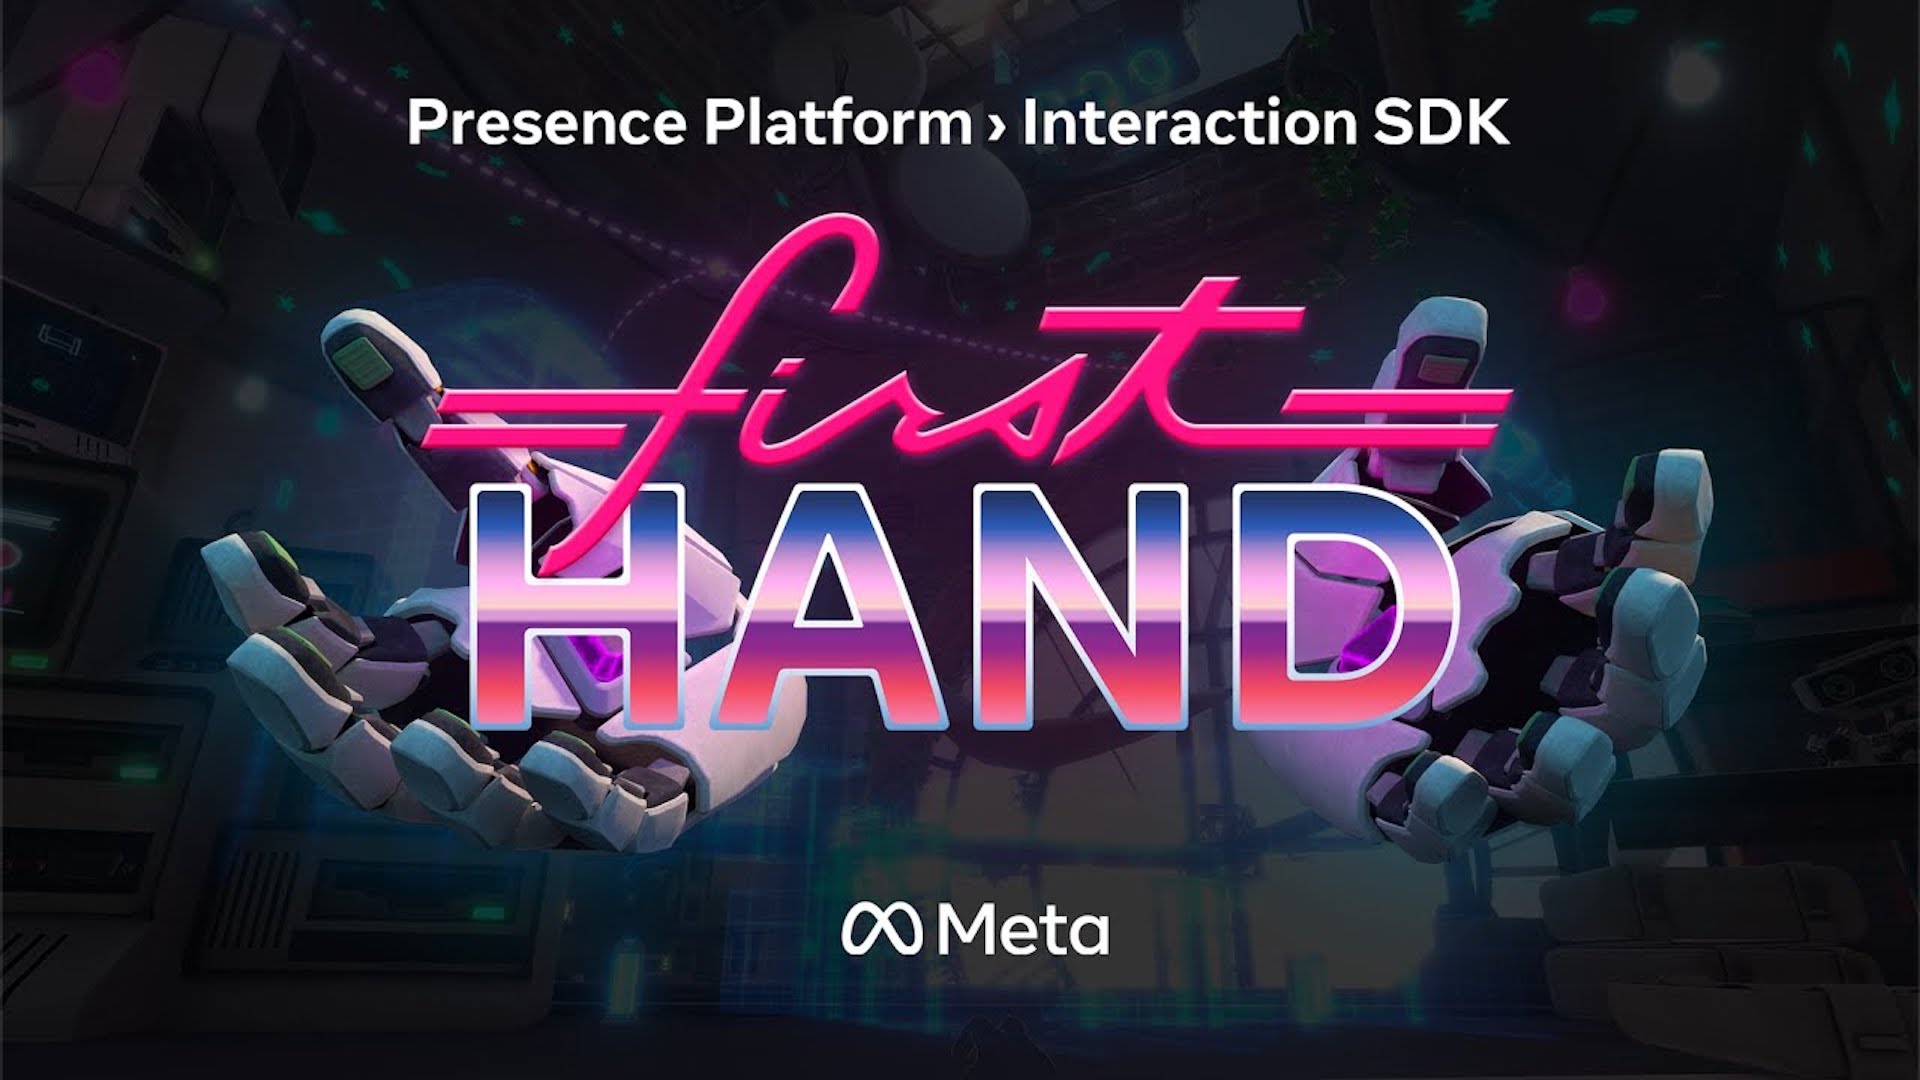 Meta's new Quest 2 demo shows the magic of hand tracking